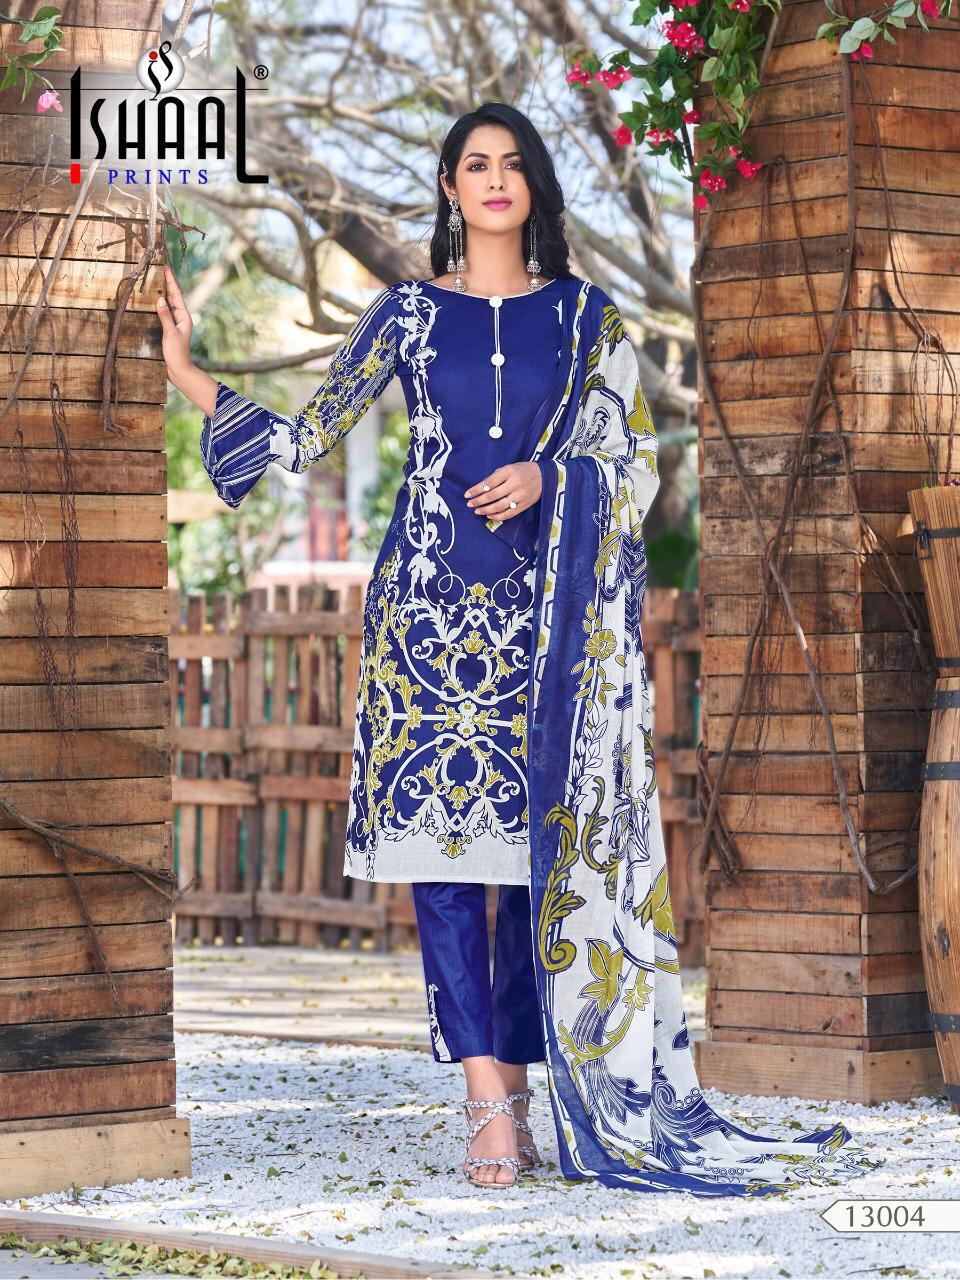 Gulmohar Vol-13 Ishaal Prints 13001-13010 Series  Pure Lawn Prints Dress Material Wholesale Collection From Surat